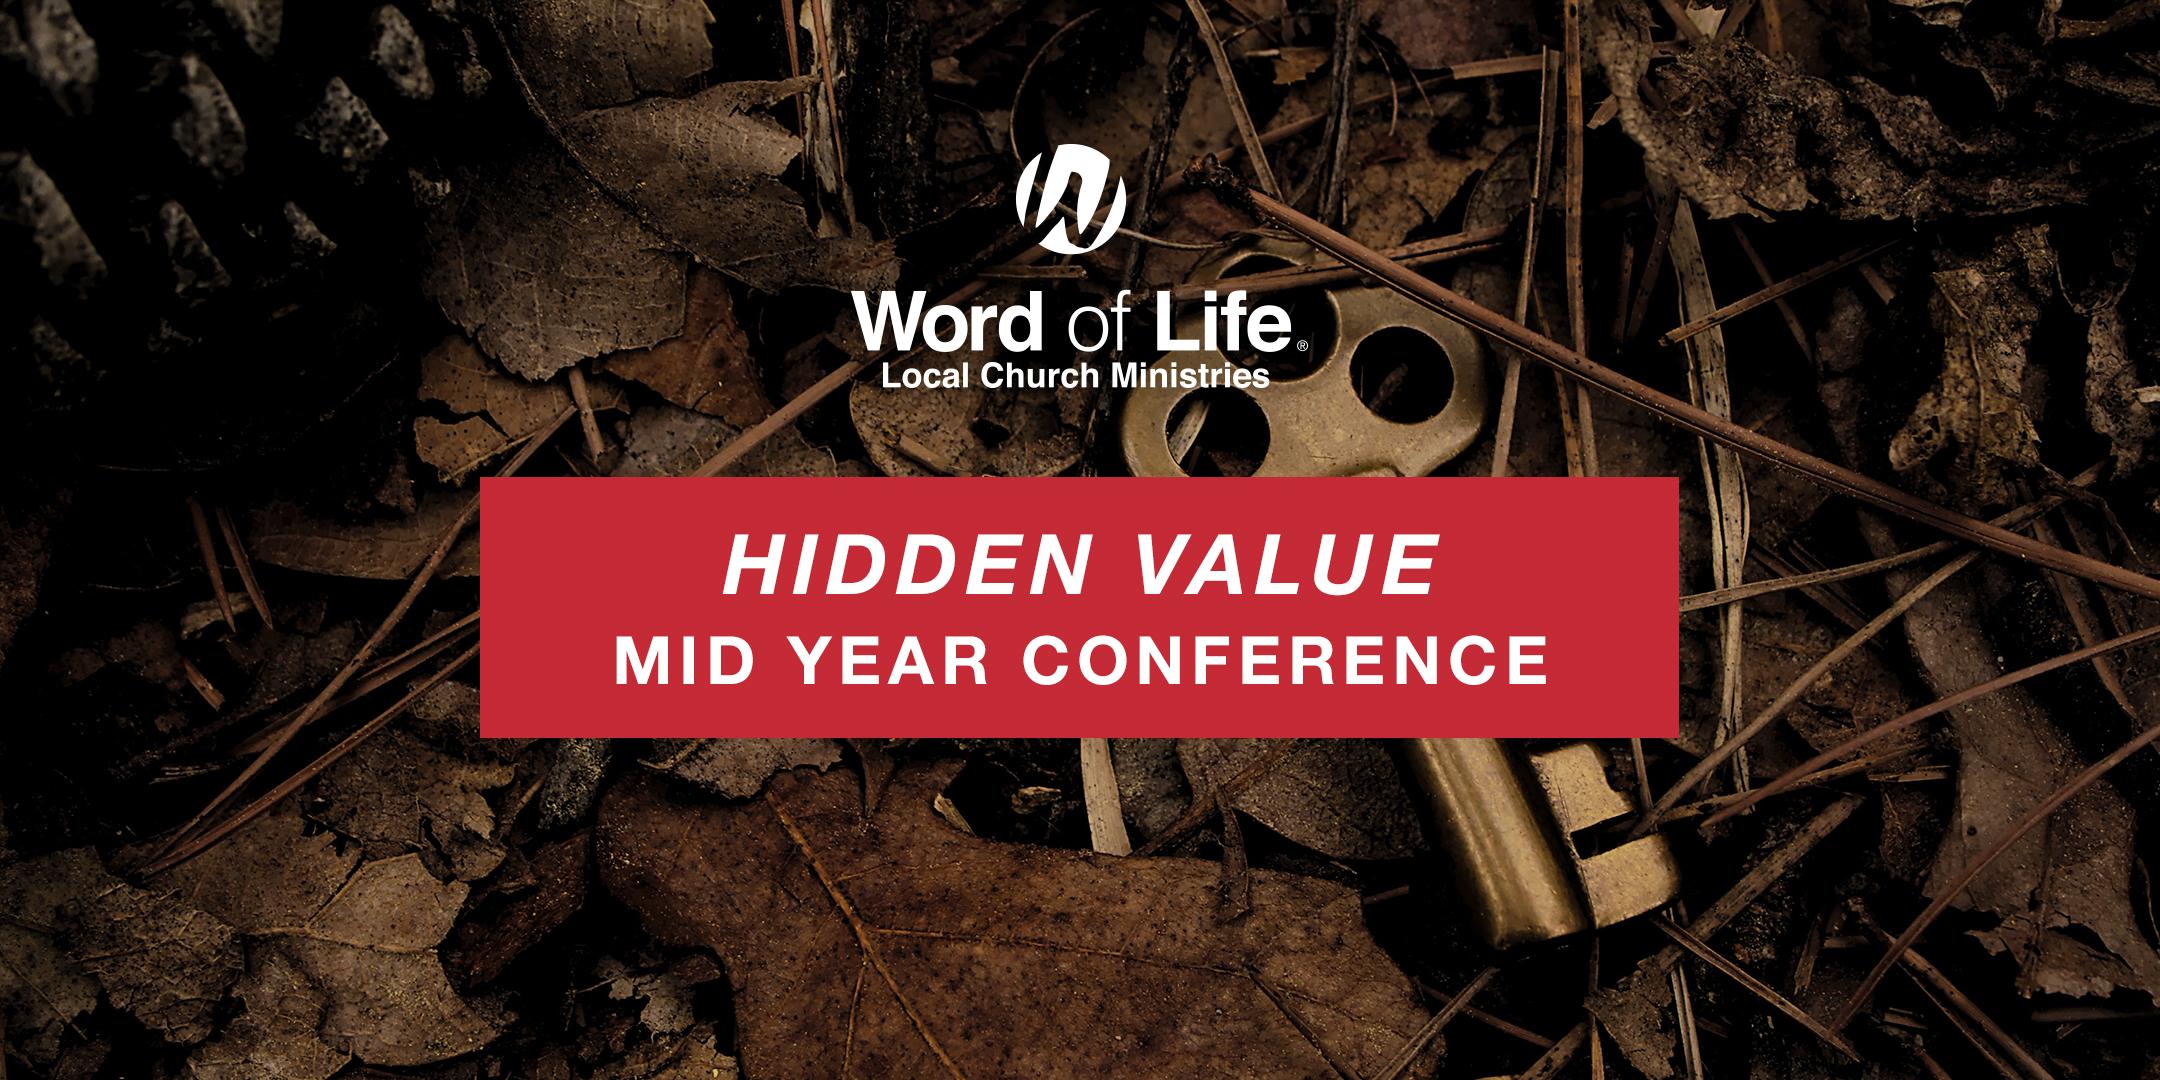 Hidden Value: Mid year conference